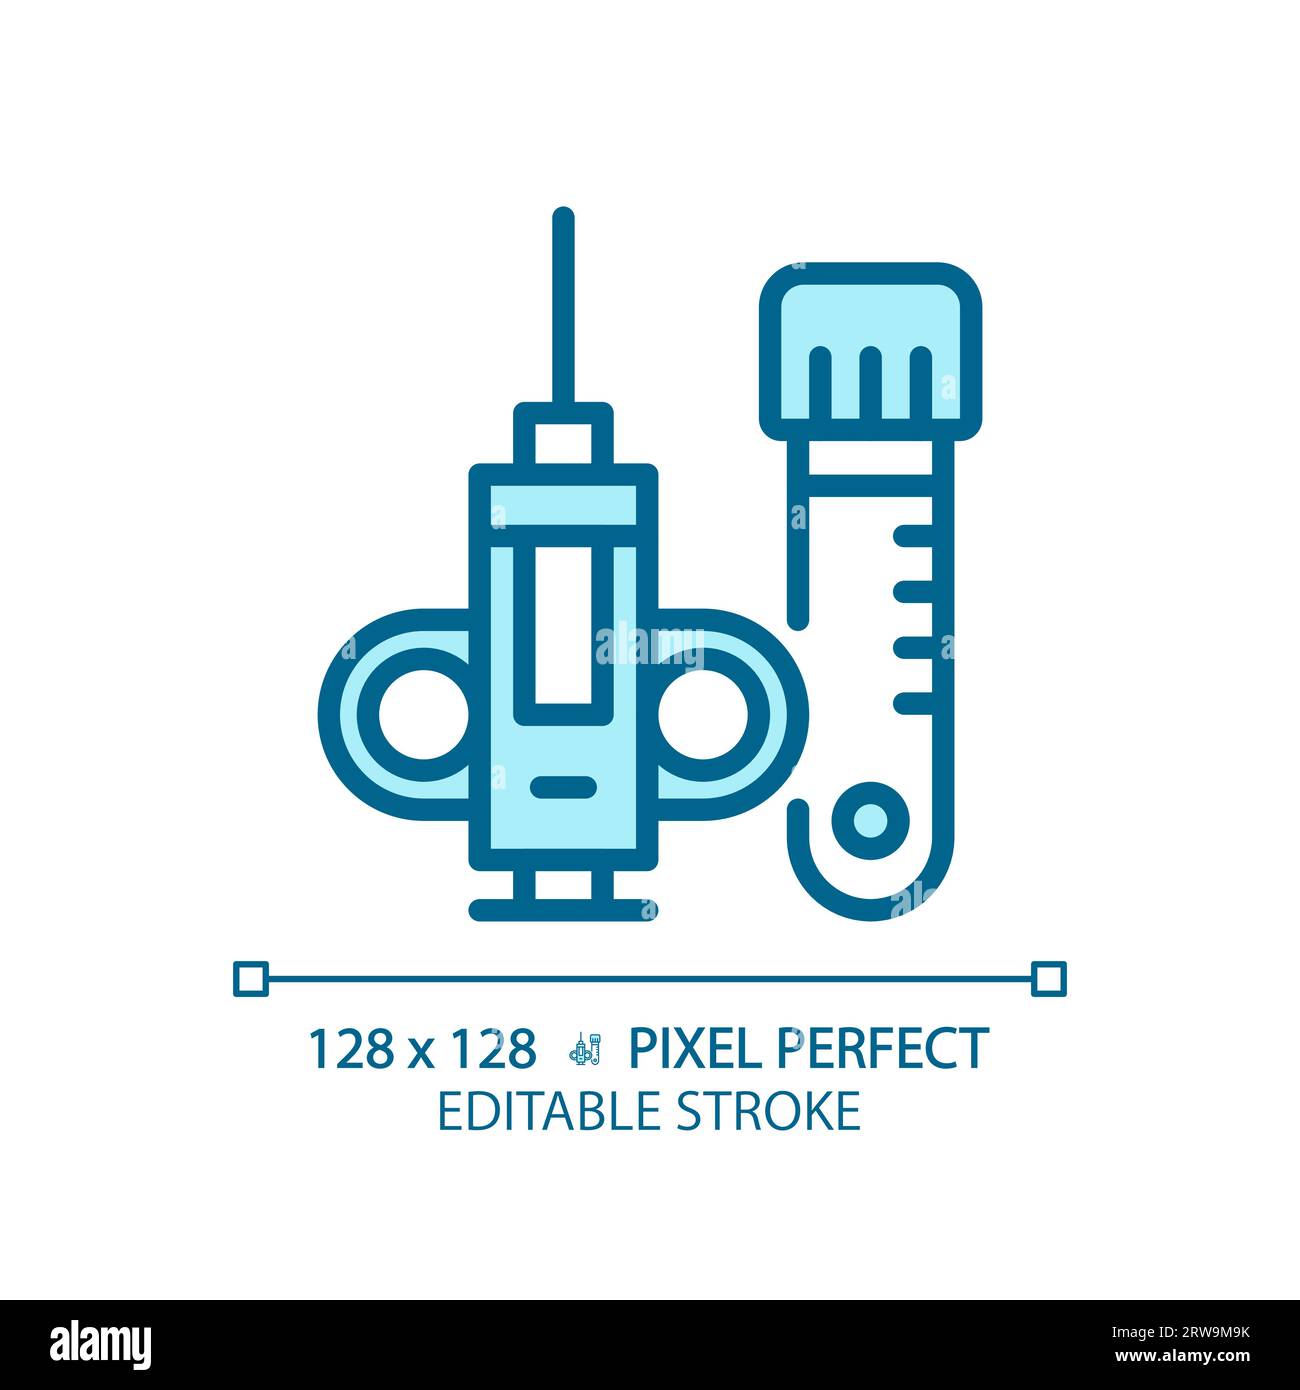 Biopsy needle pixel perfect light blue icon Stock Vector